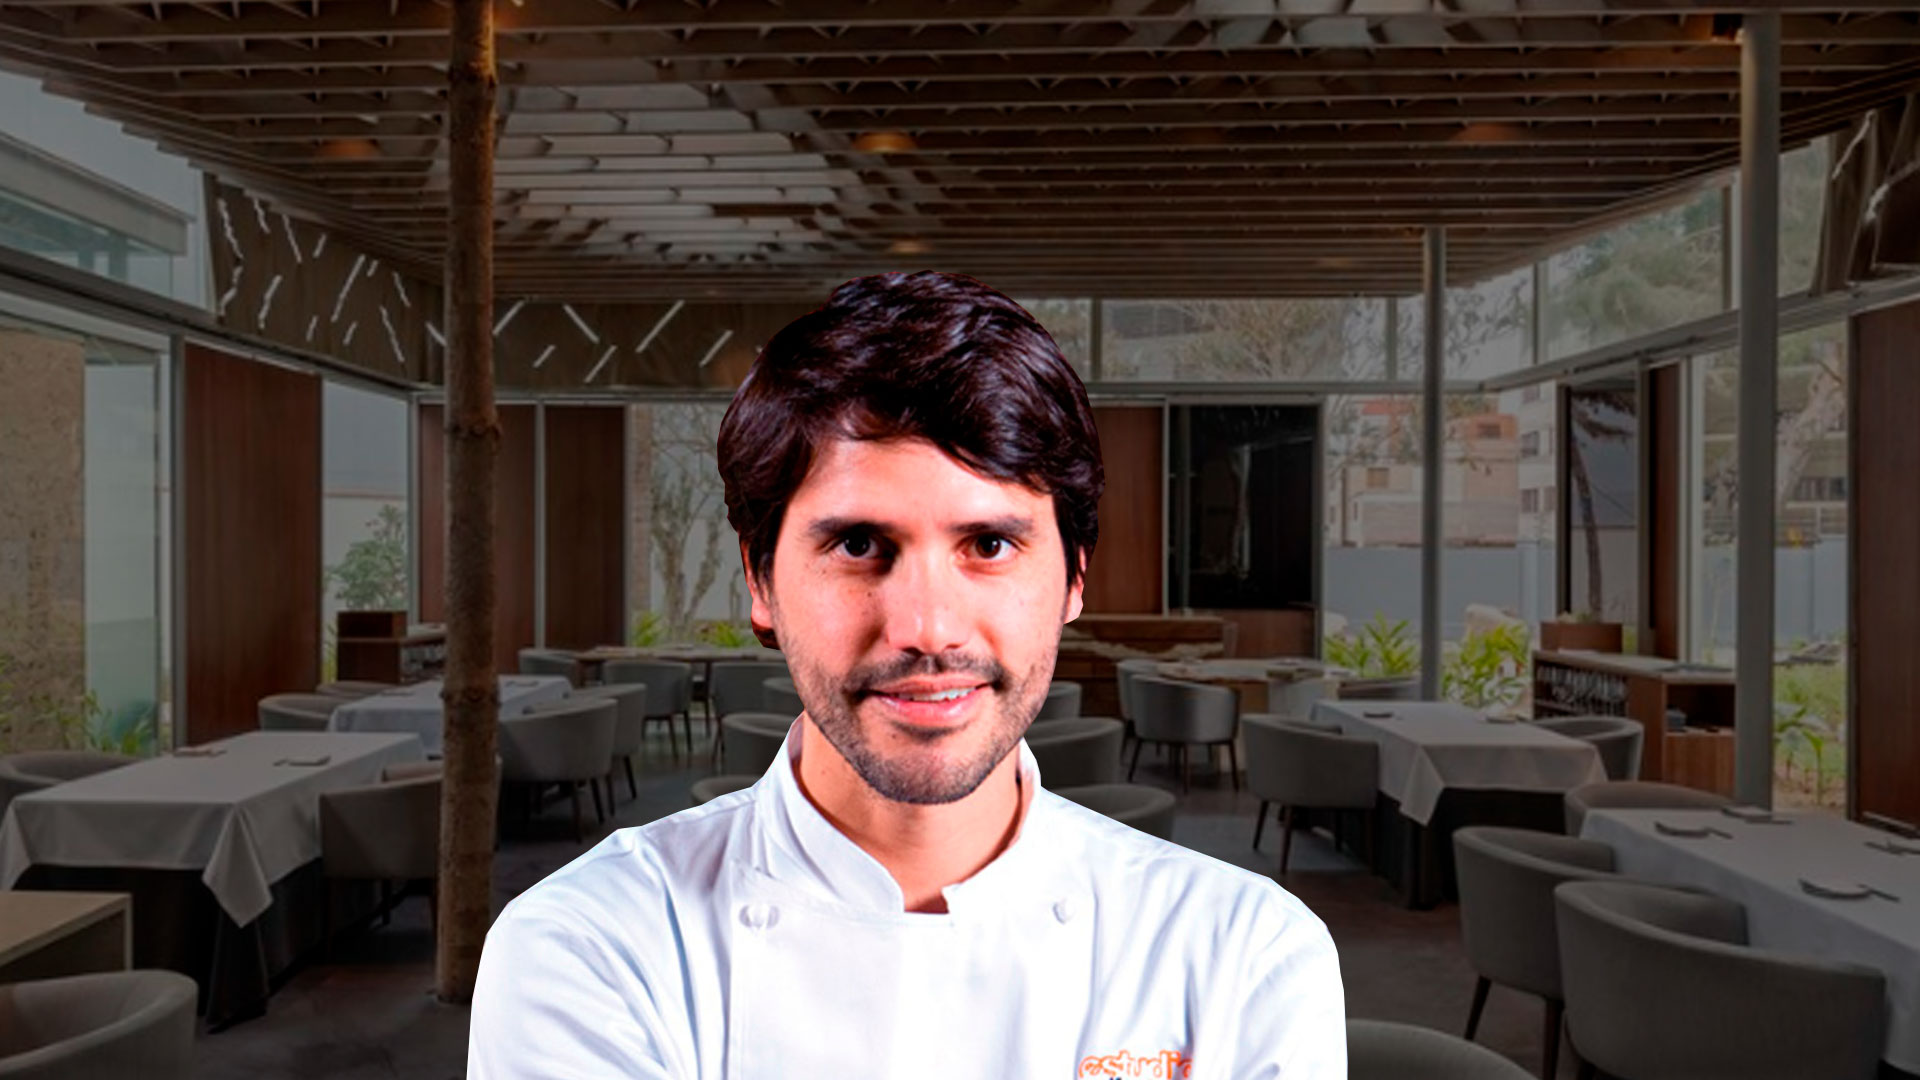 Virgilio Martínez is the chef behind Central's success as the best restaurant in the world.